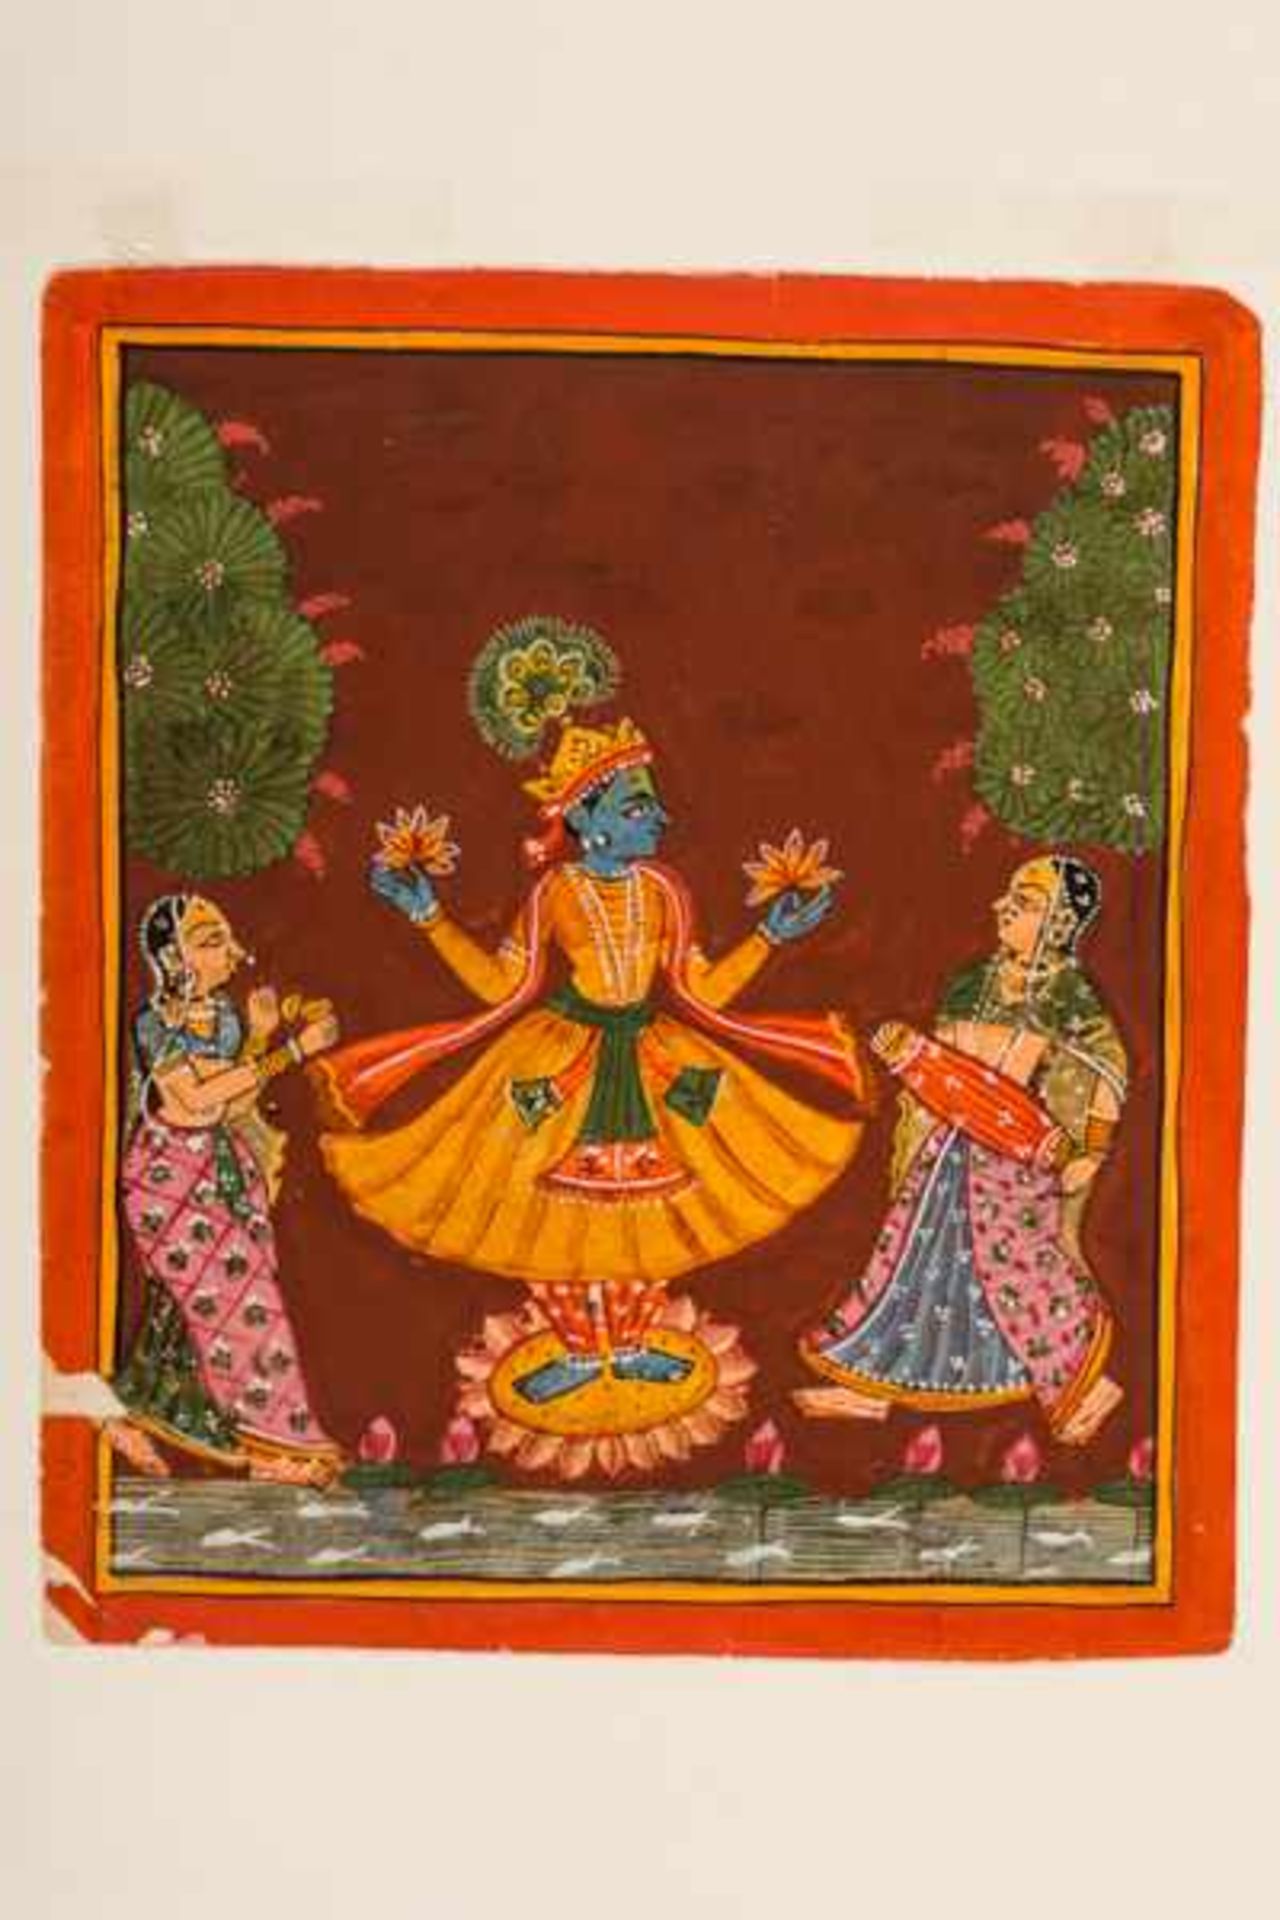 THE GOD KRISHNA ON A LOTUS BLOSSOM Paint on paper. India, Rajasthan, ca. 18th cent.In the center - Image 2 of 2